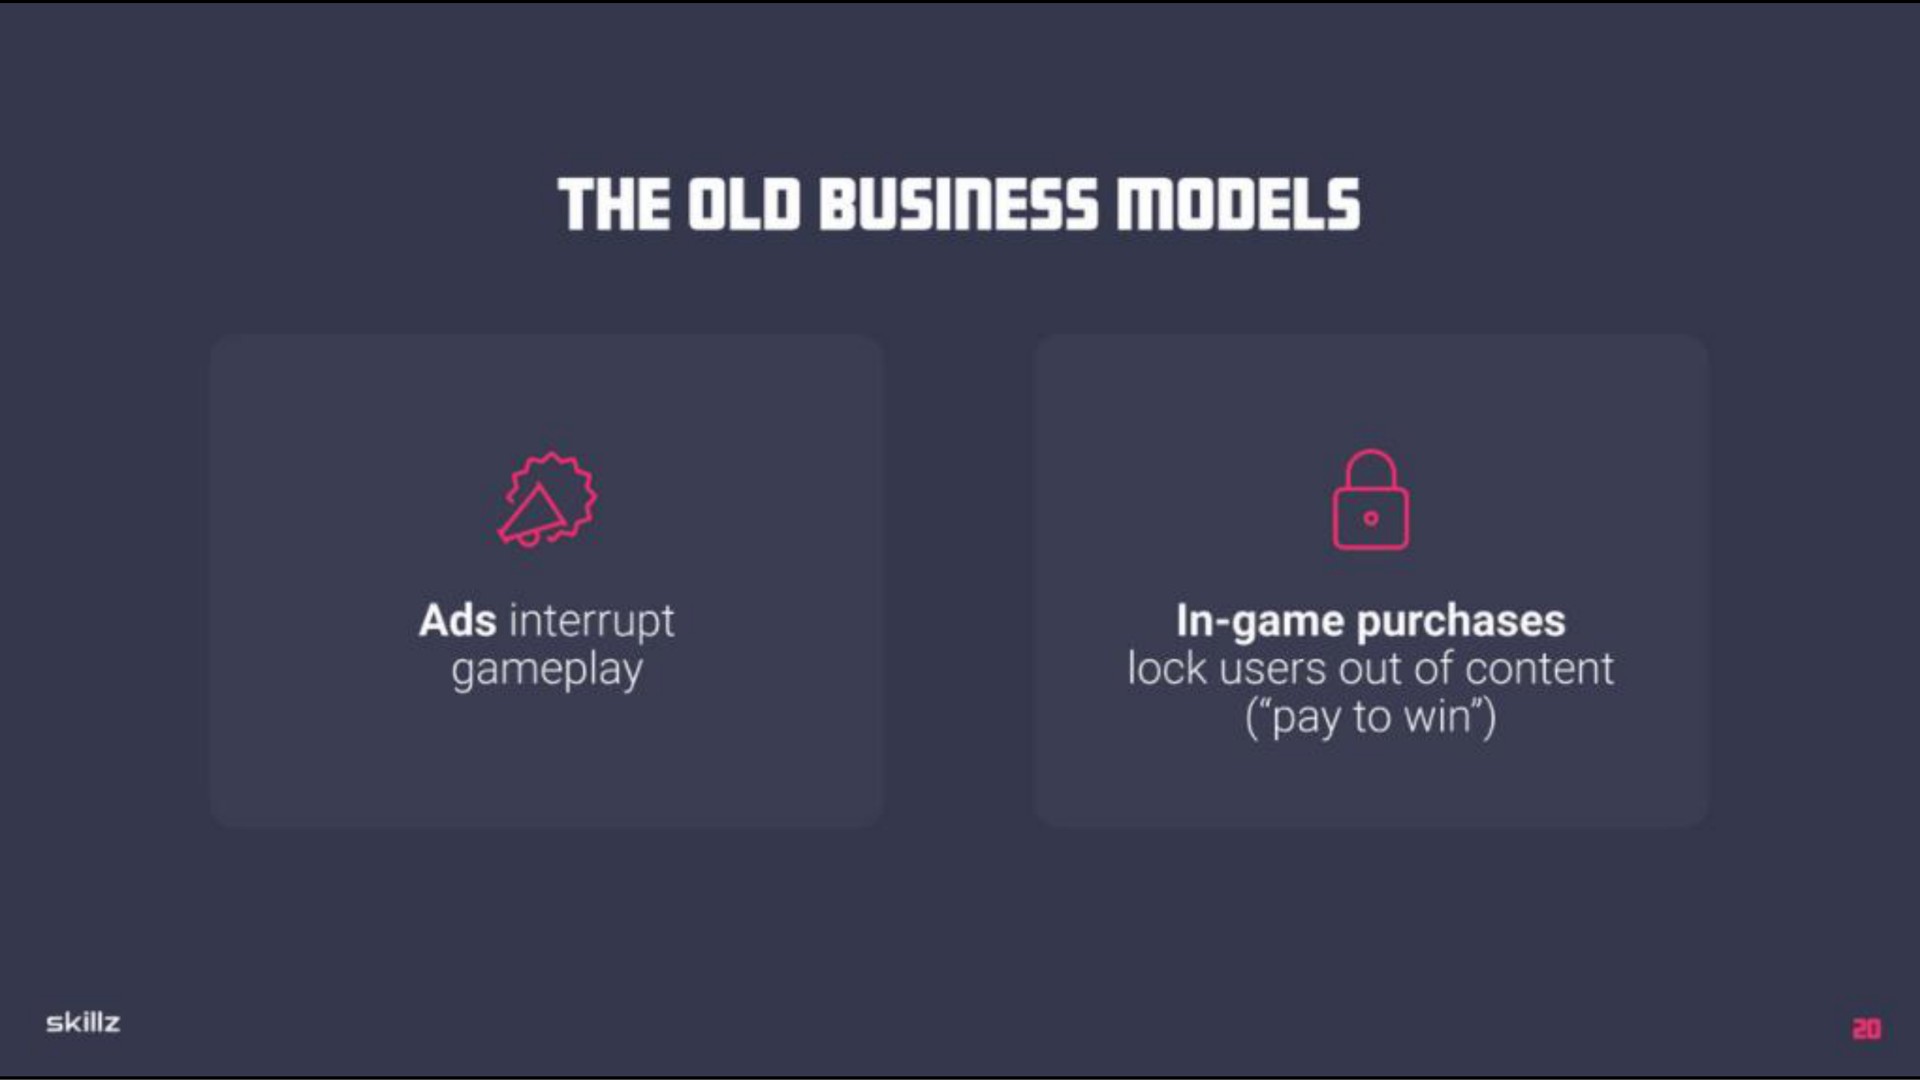 the old business models in game purchases lock users out of content | Skillz